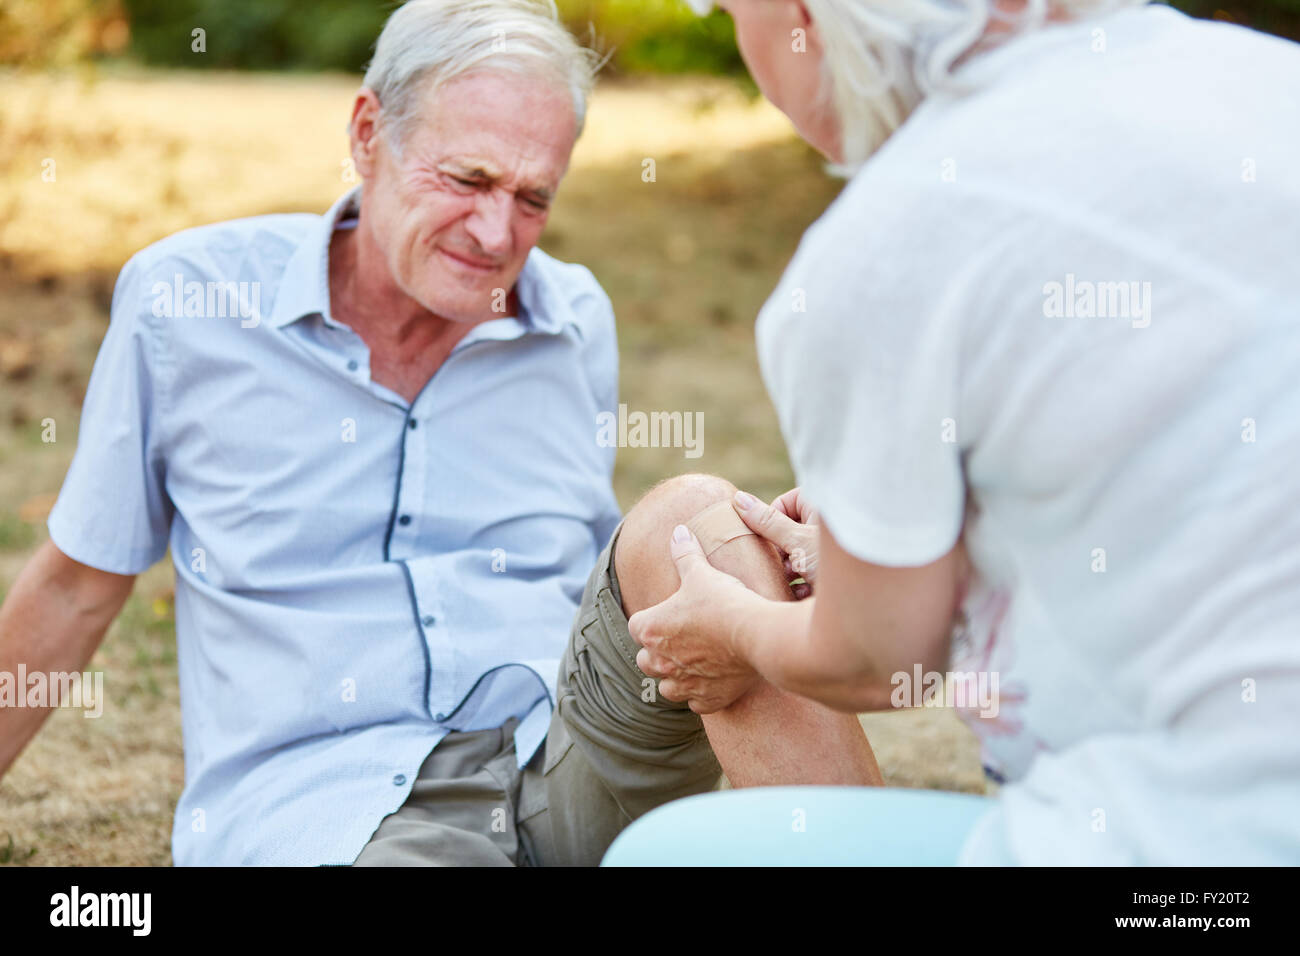 Old man with pain on his knee and woman gives him first aid Stock Photo